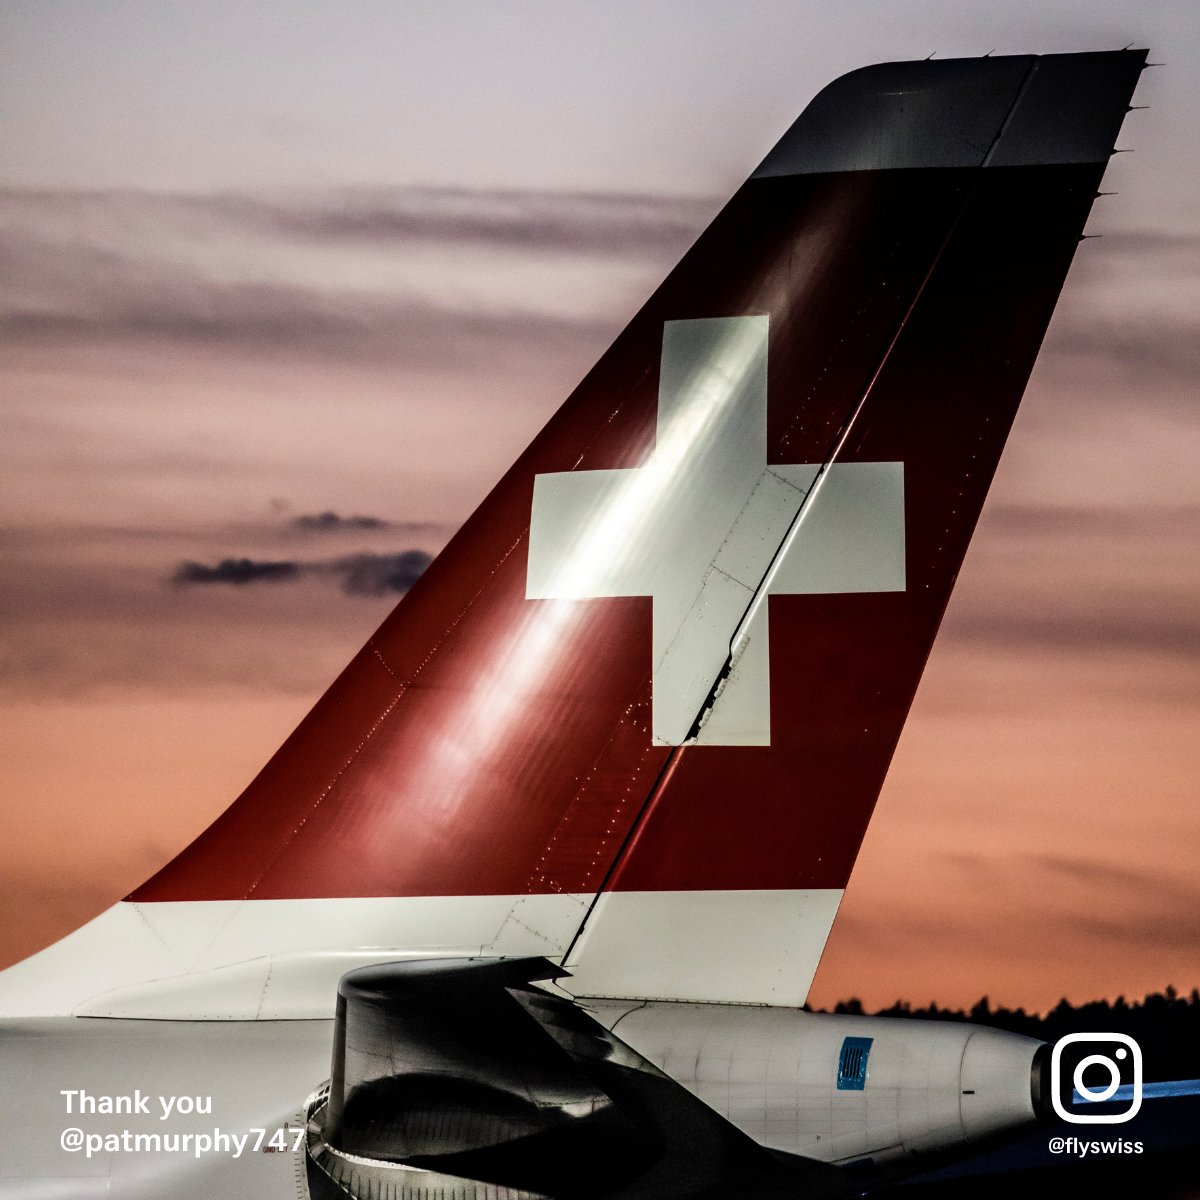 Swiss Intl Air Lines Flyswiss Twitter - turkish airlines roblox в twitter save the date roblox